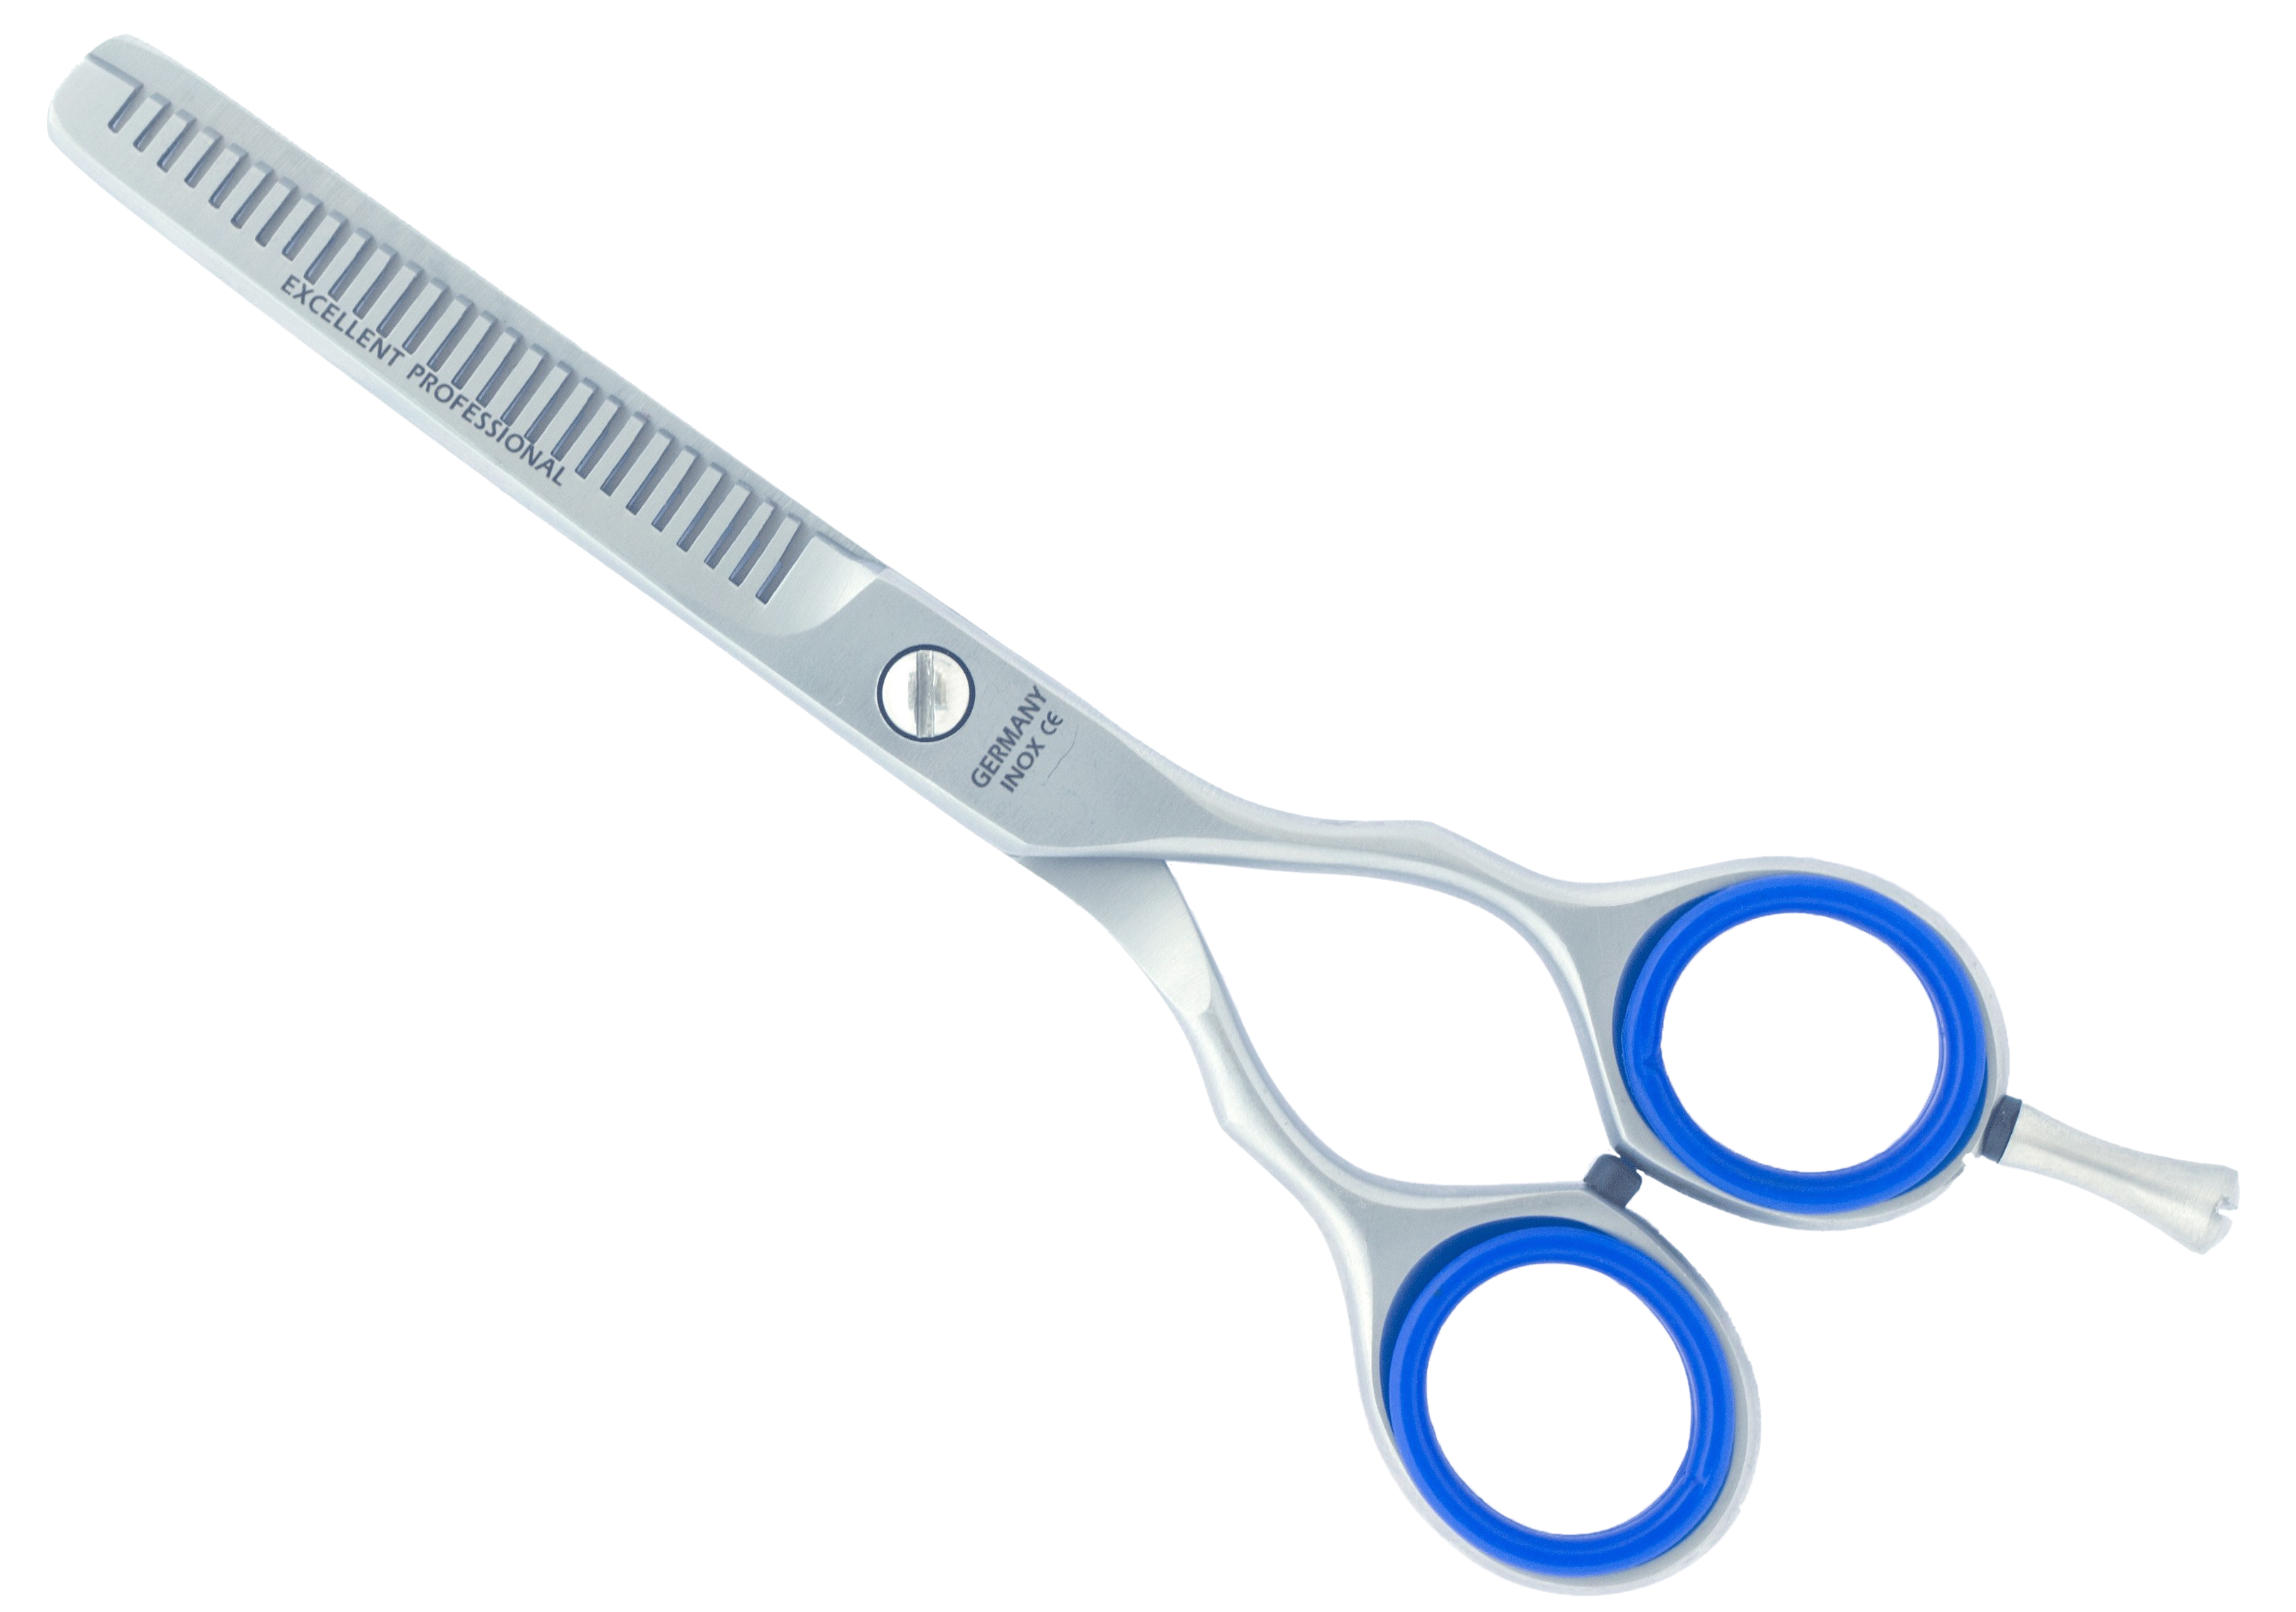 Excellent Effiliation Scissors double sided serrated